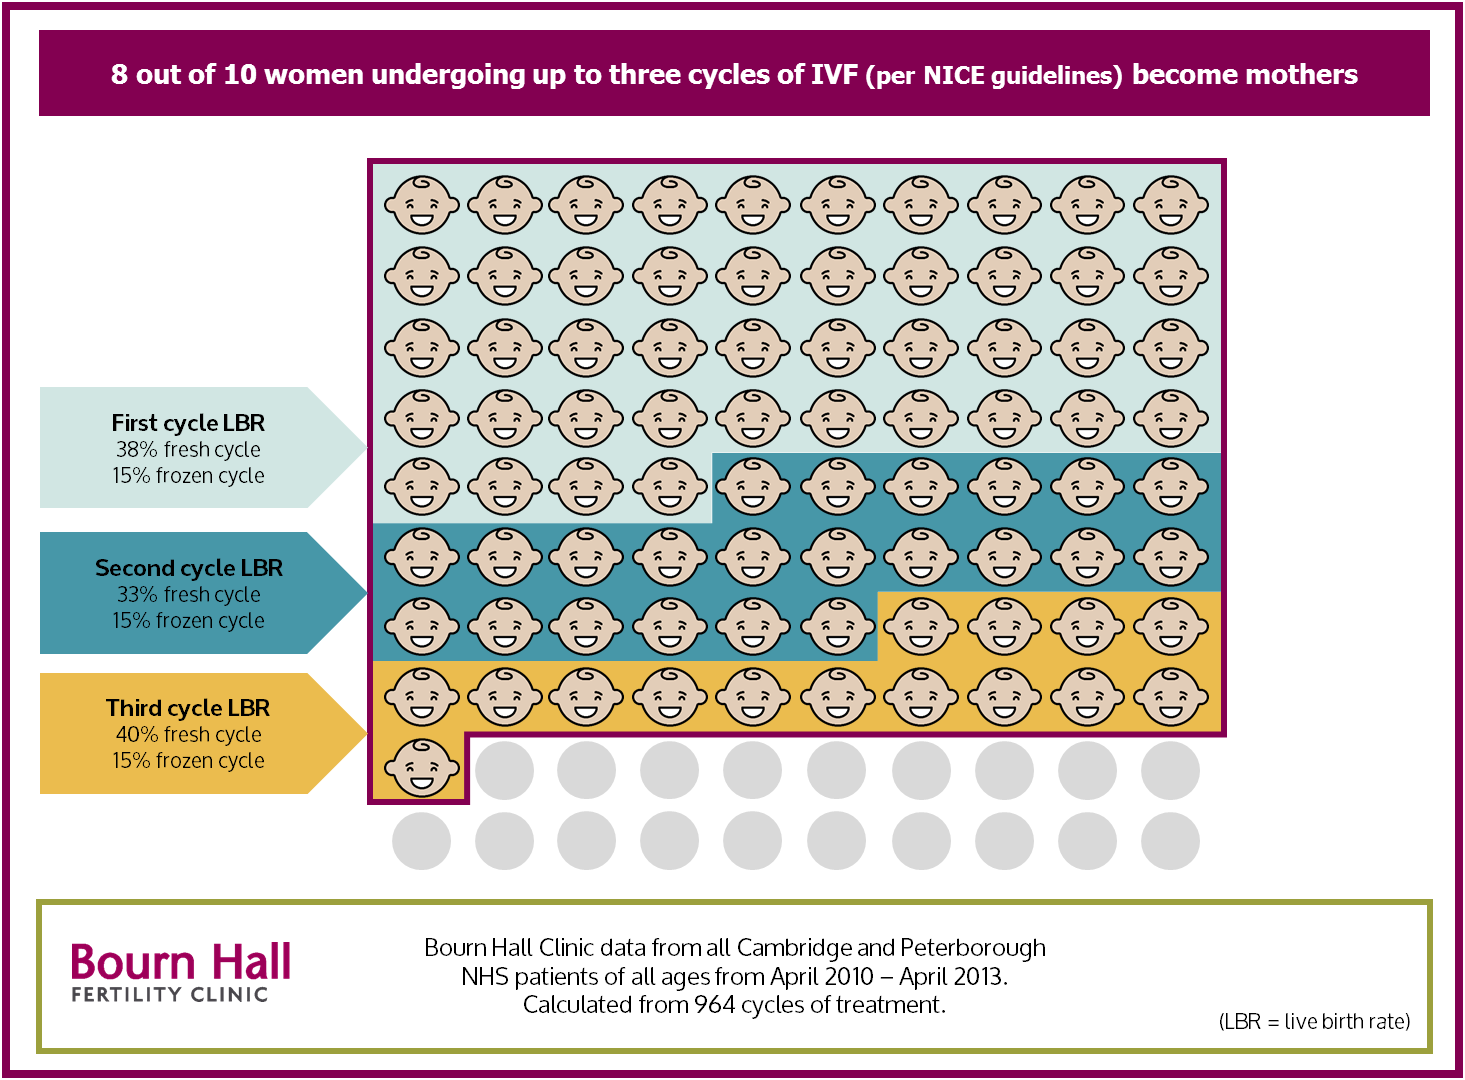 8 out of 10 Cambridge NHS IVF patients have a baby within 3 cycles